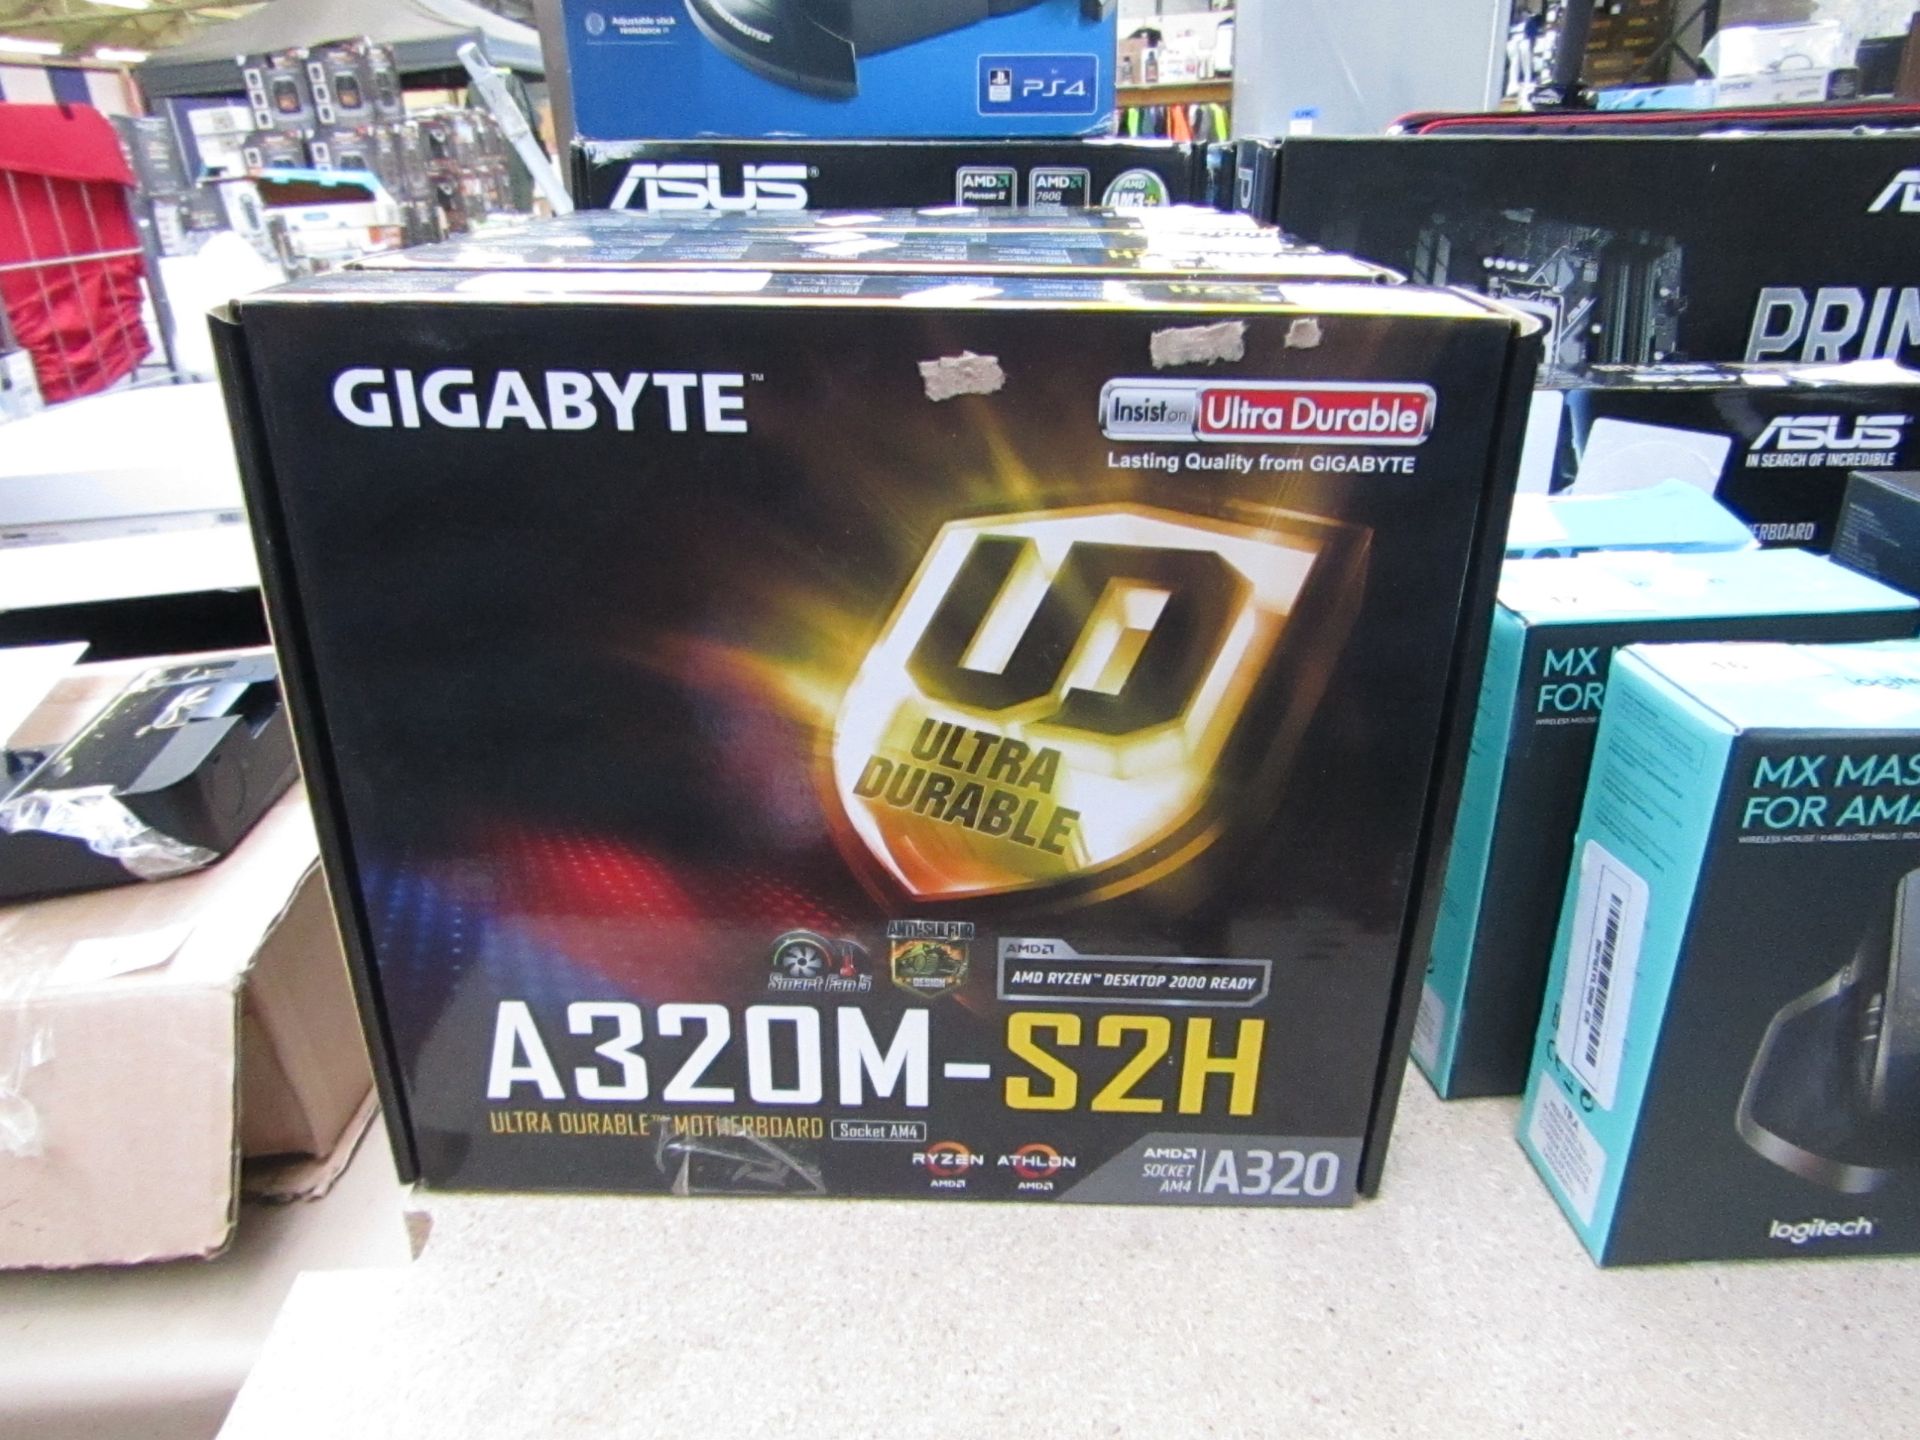 Gigabyte A320M-S2H ultra durable motherboard, untested and boxed.